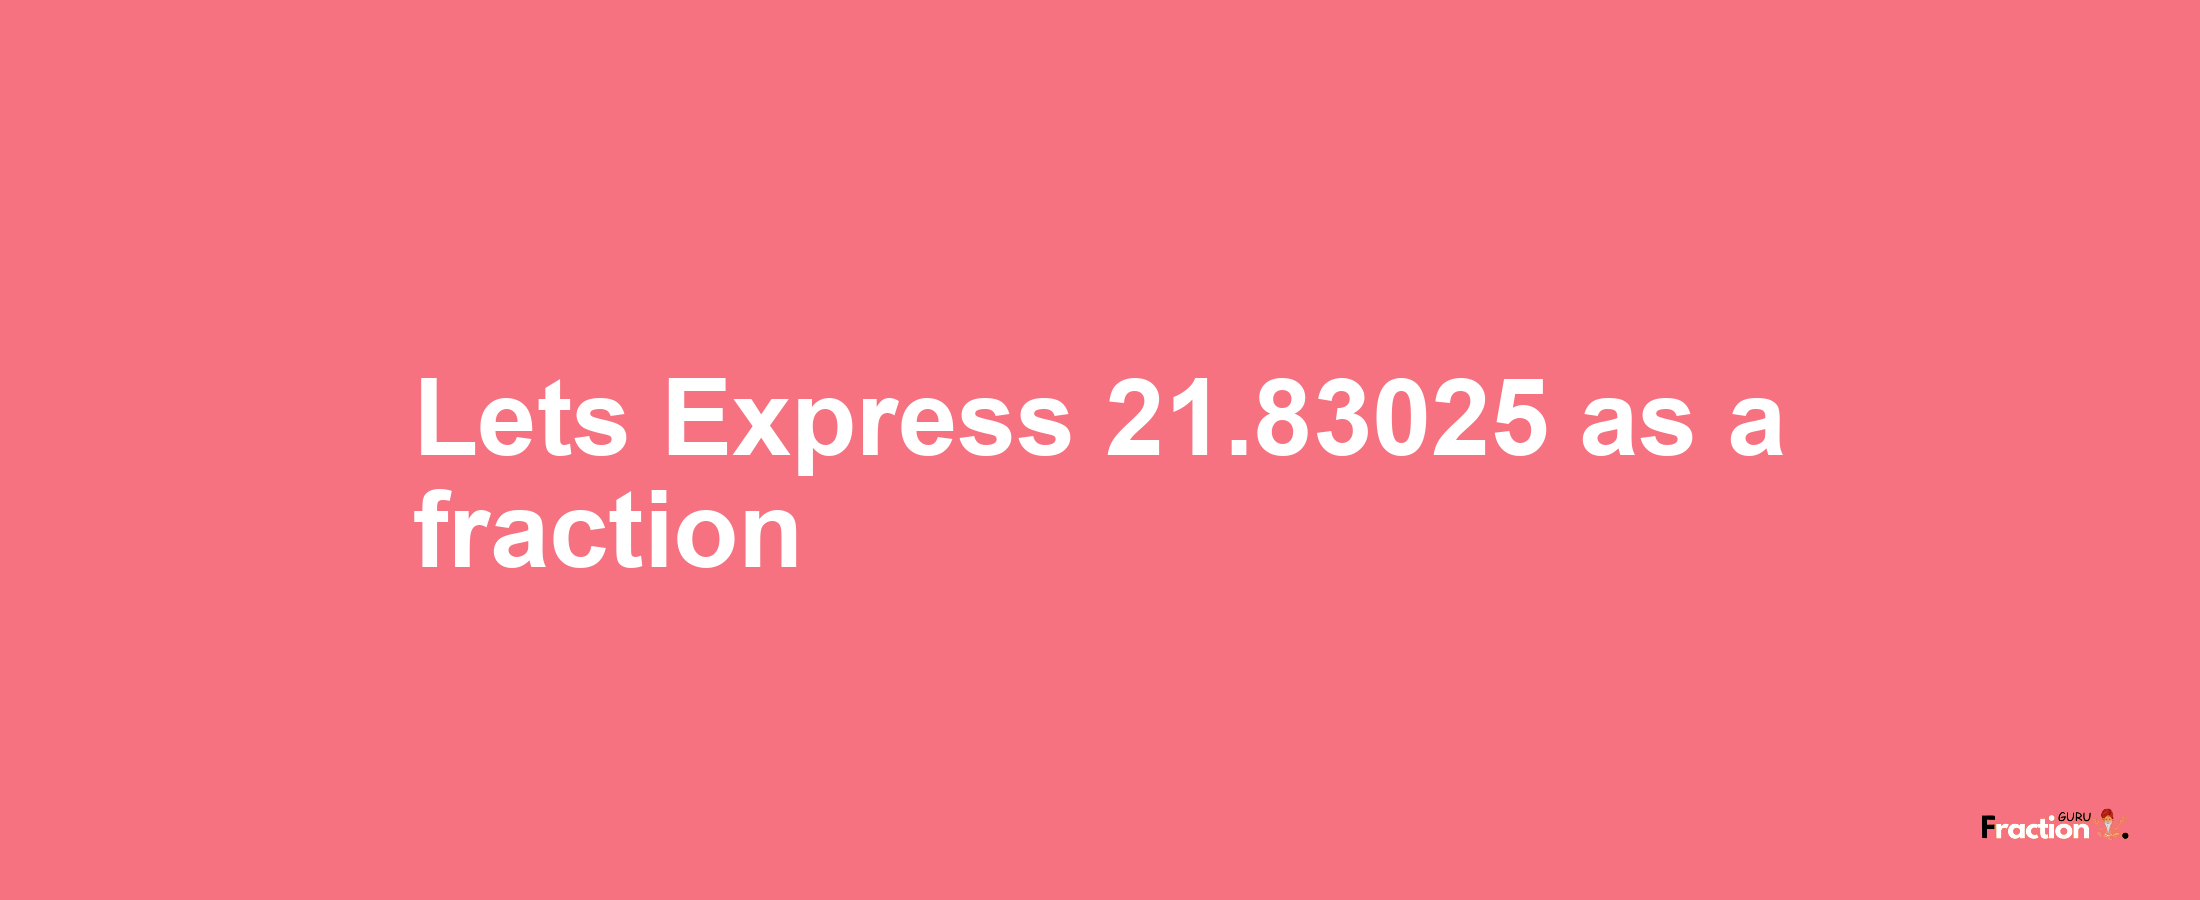 Lets Express 21.83025 as afraction